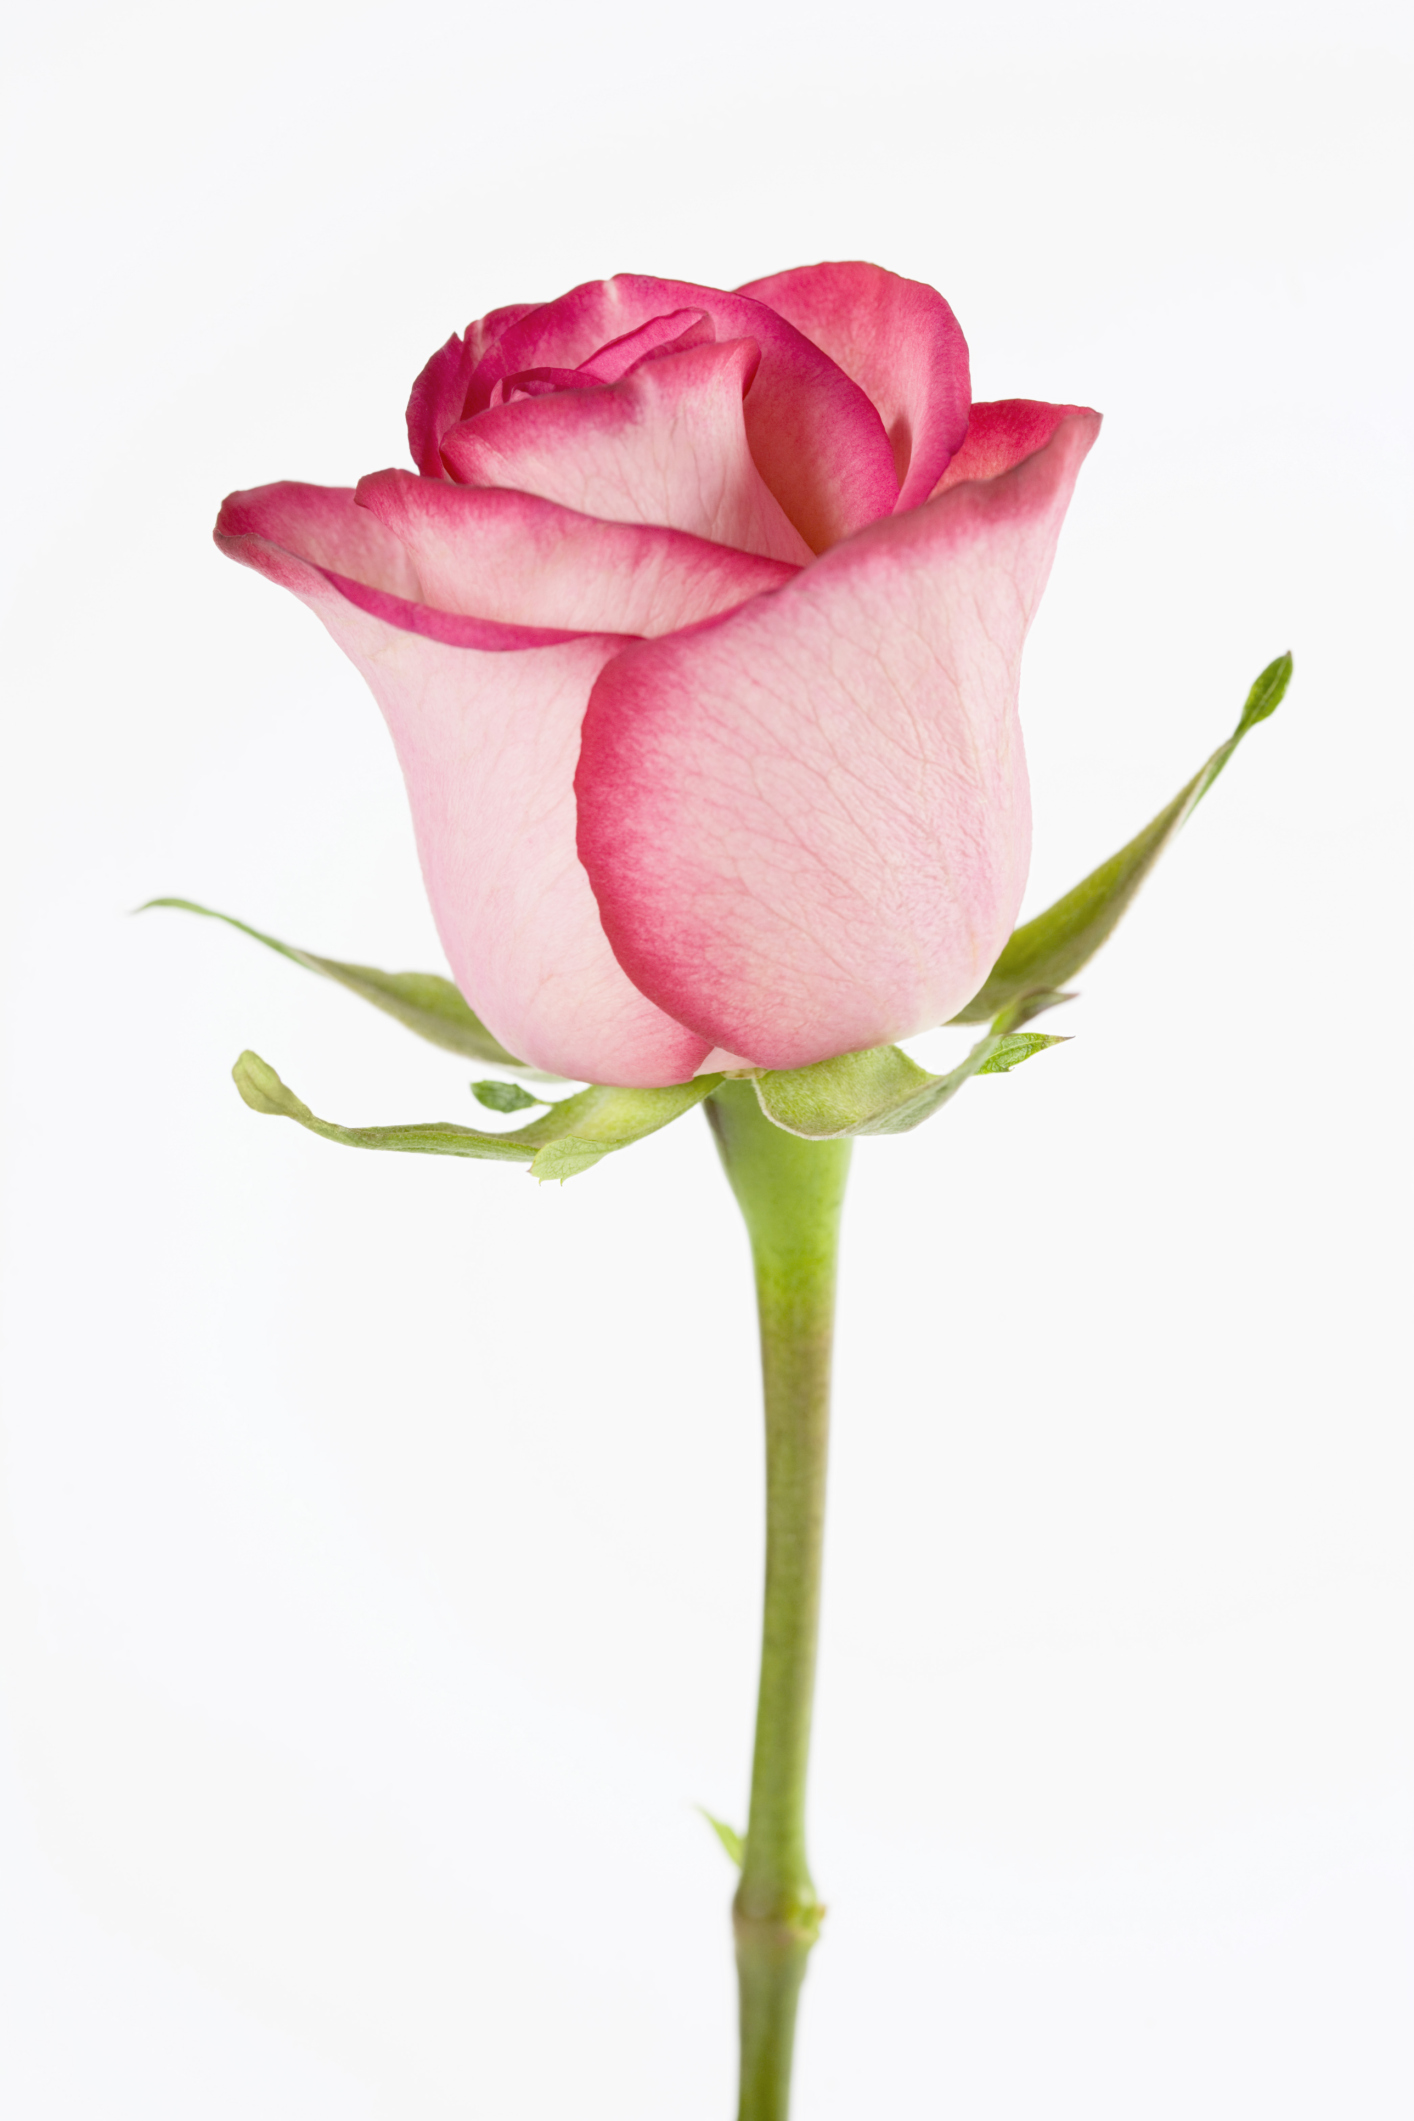 How Long Until a Rosebud Becomes a Rose? | ehow